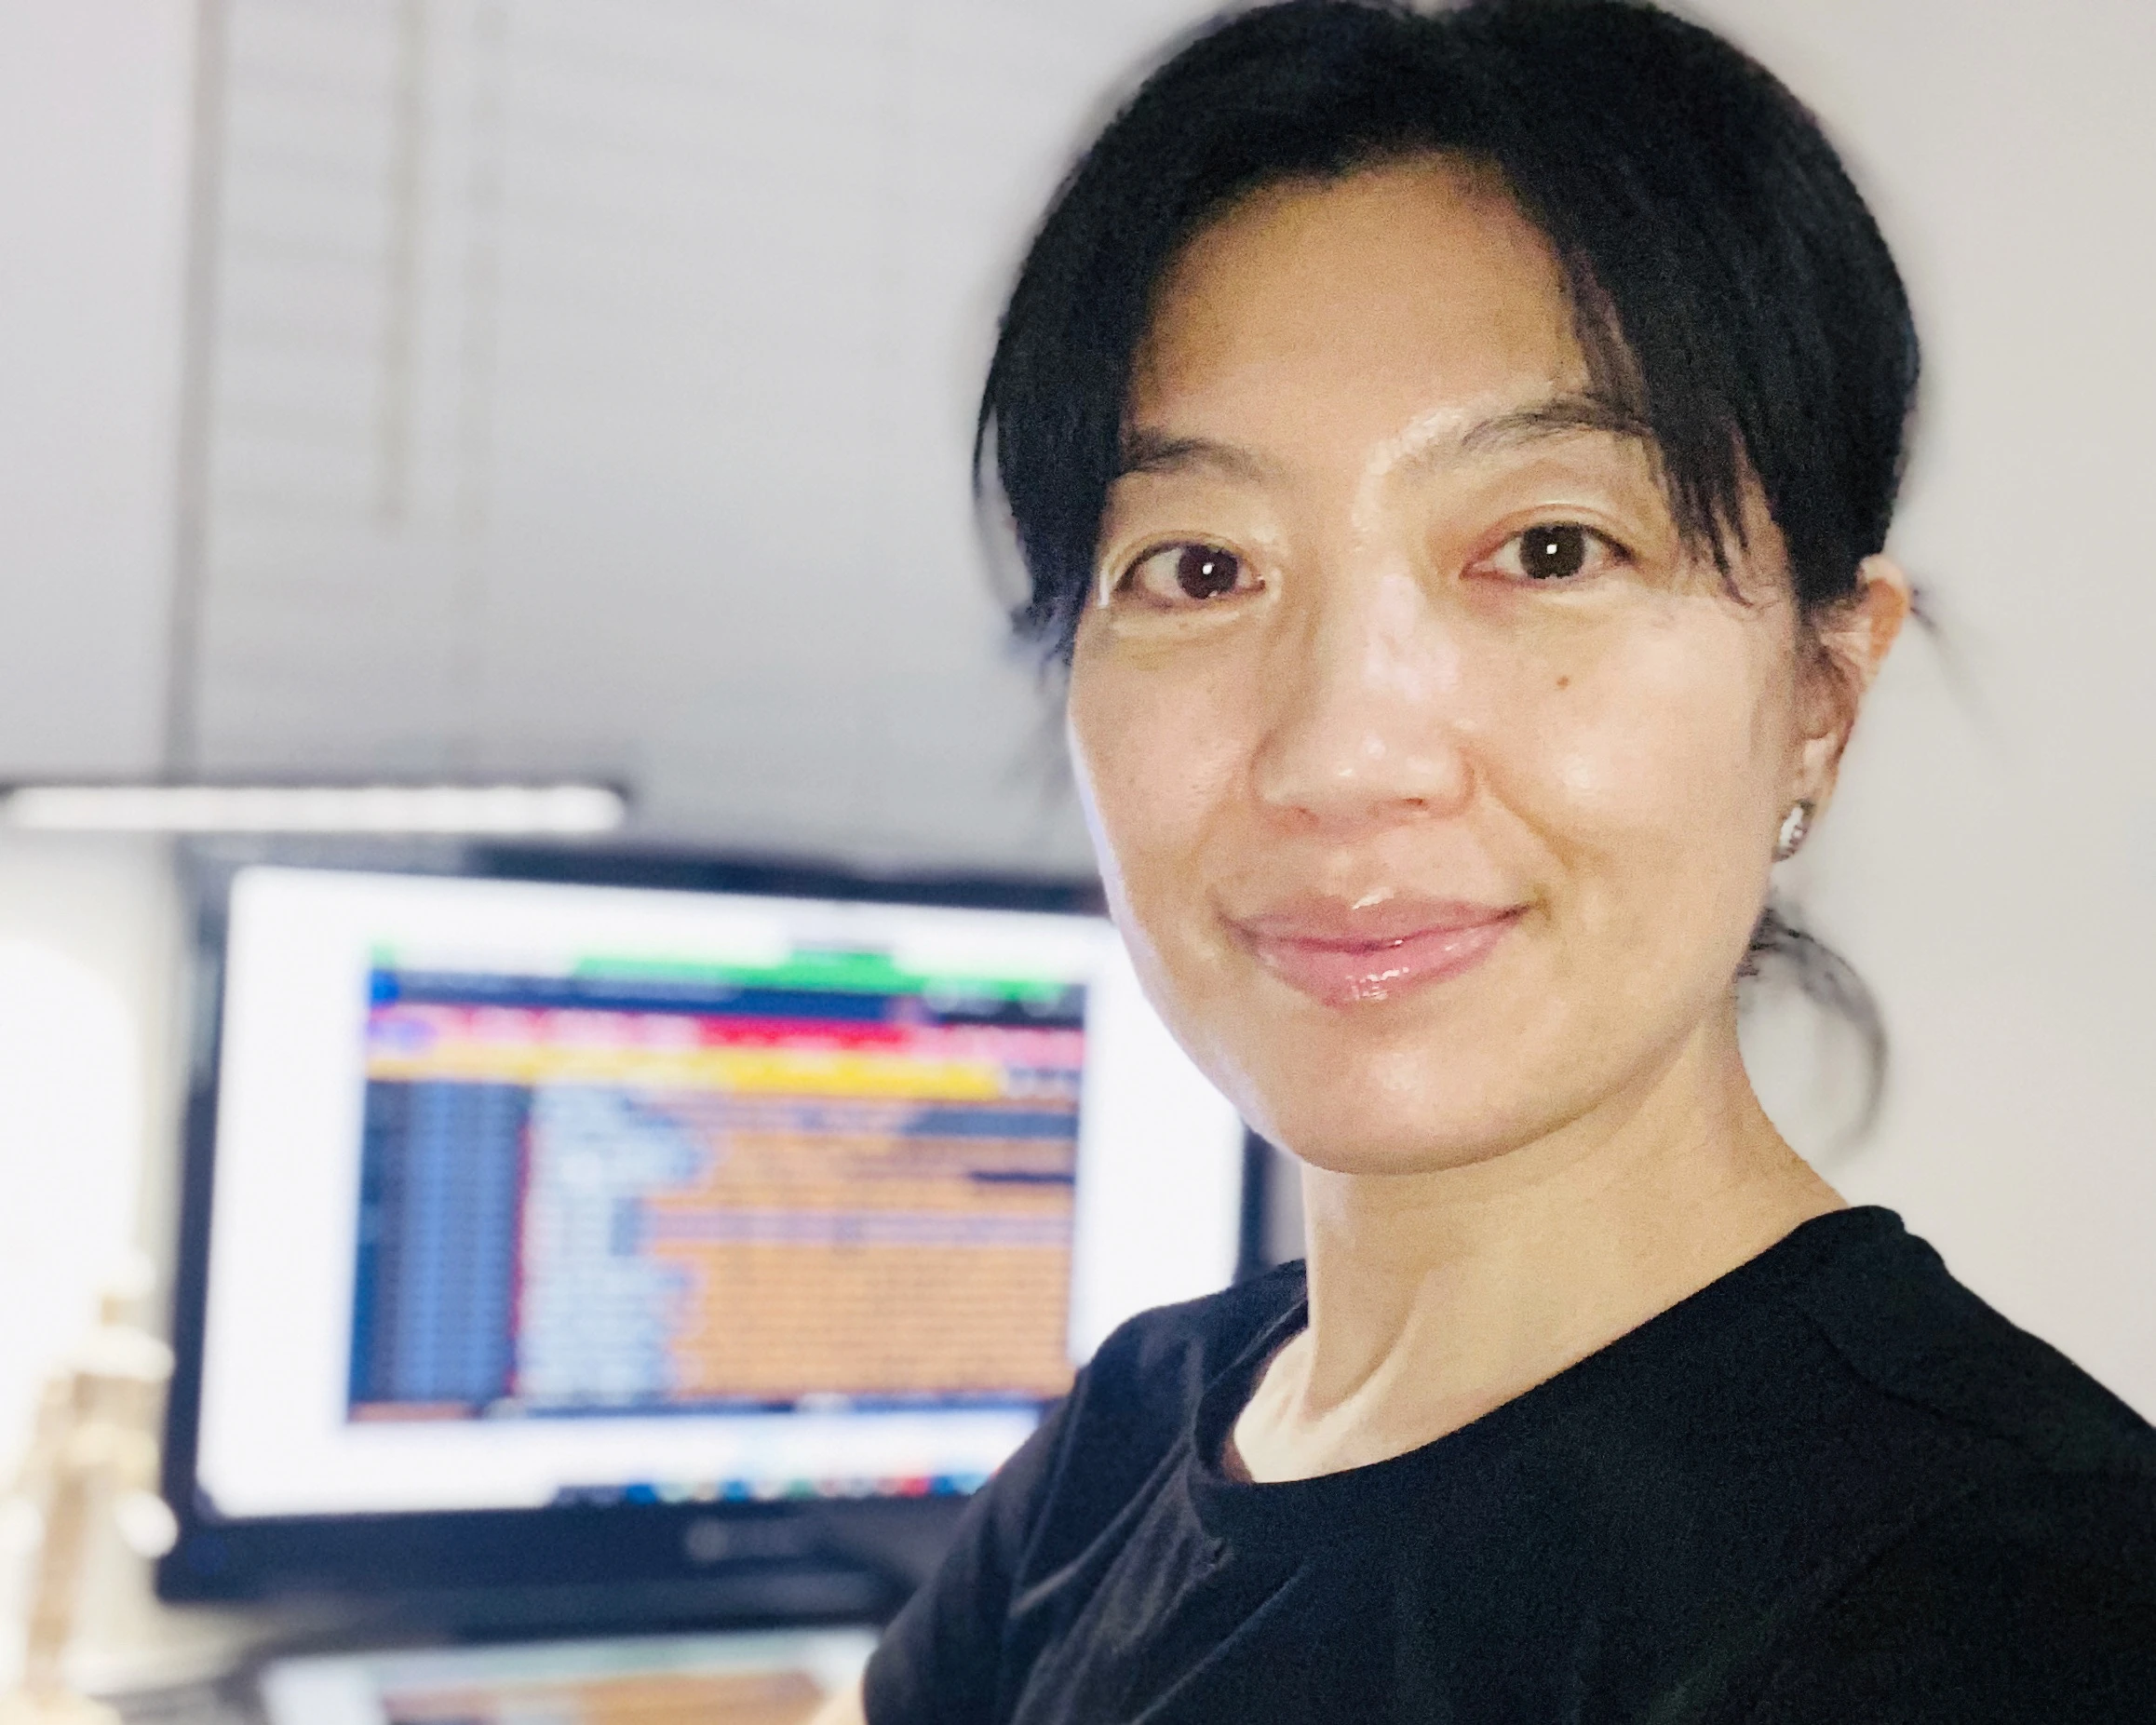 Jane Zhu is an engineer on the Storage Distributed team at Bloomberg.